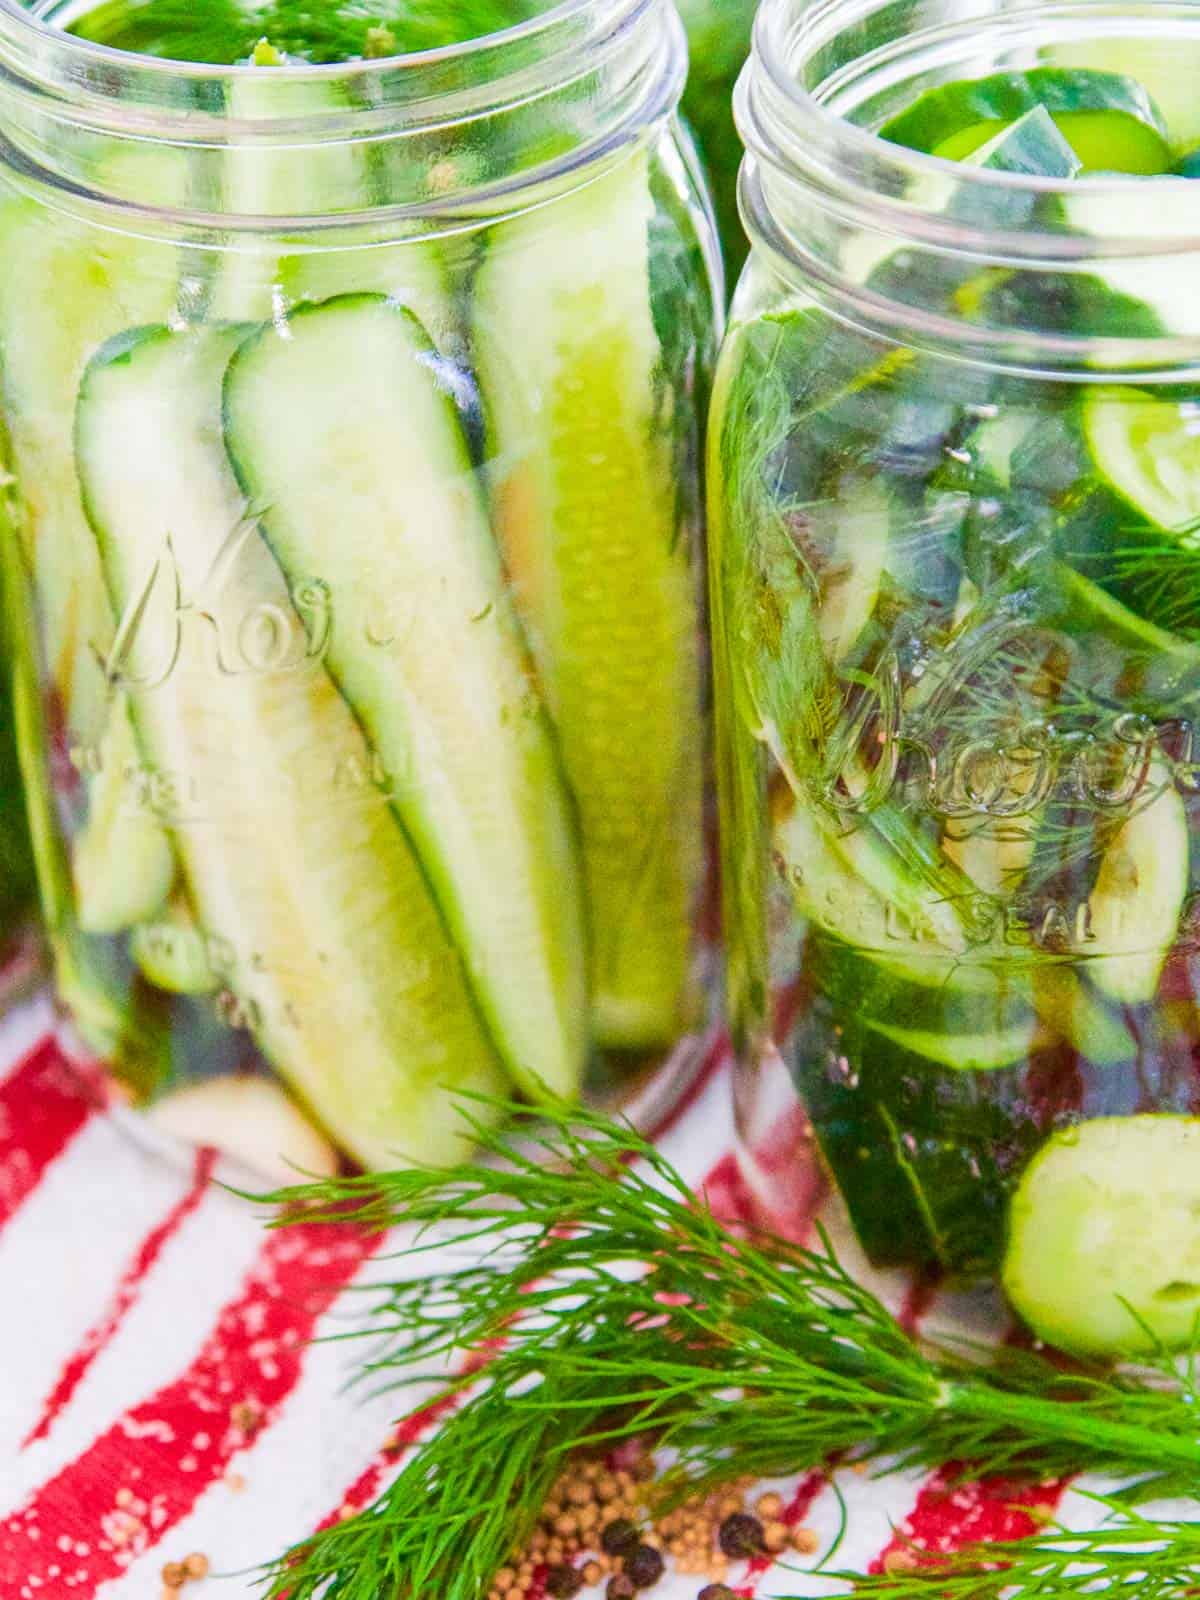 Refrigerator Dill Pickle Recipe (No Canning) - Delicious Table